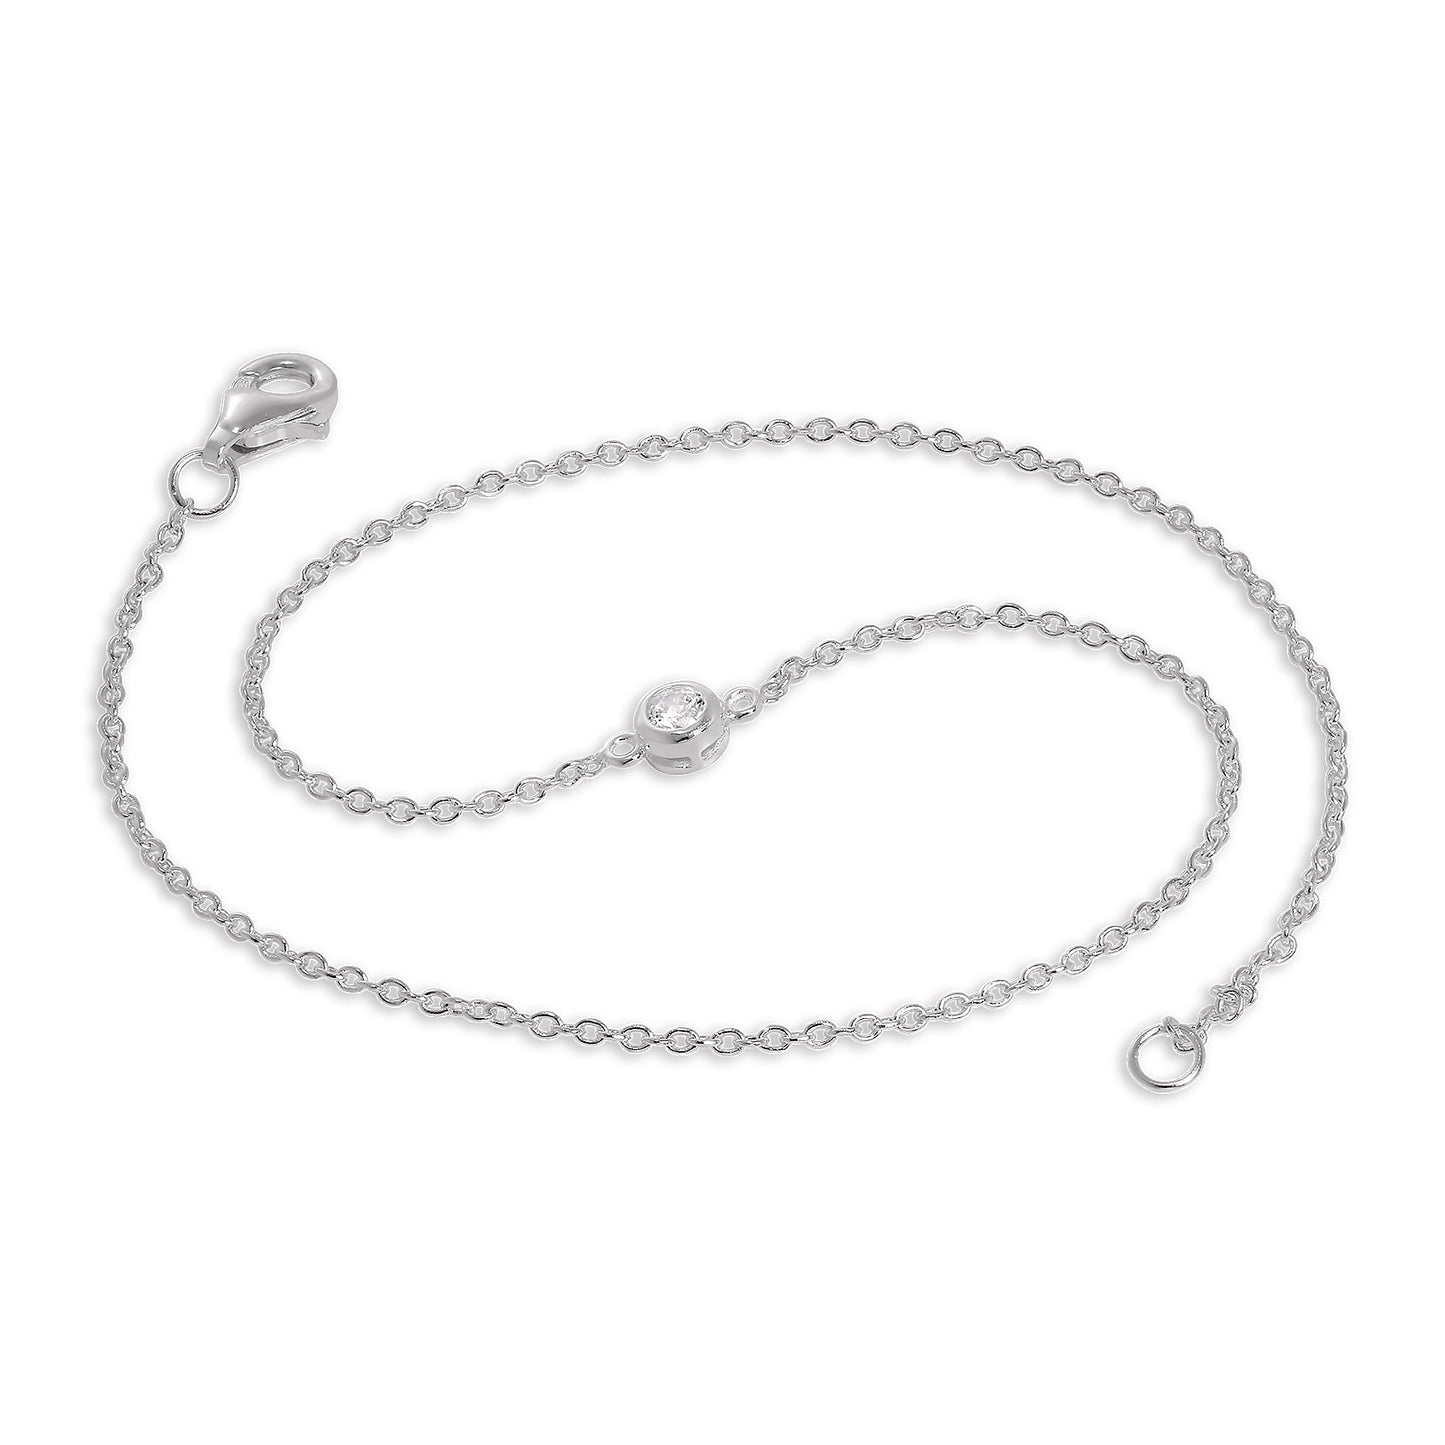 Sterling Silver & 5mm Round CZ Crystal Anklet